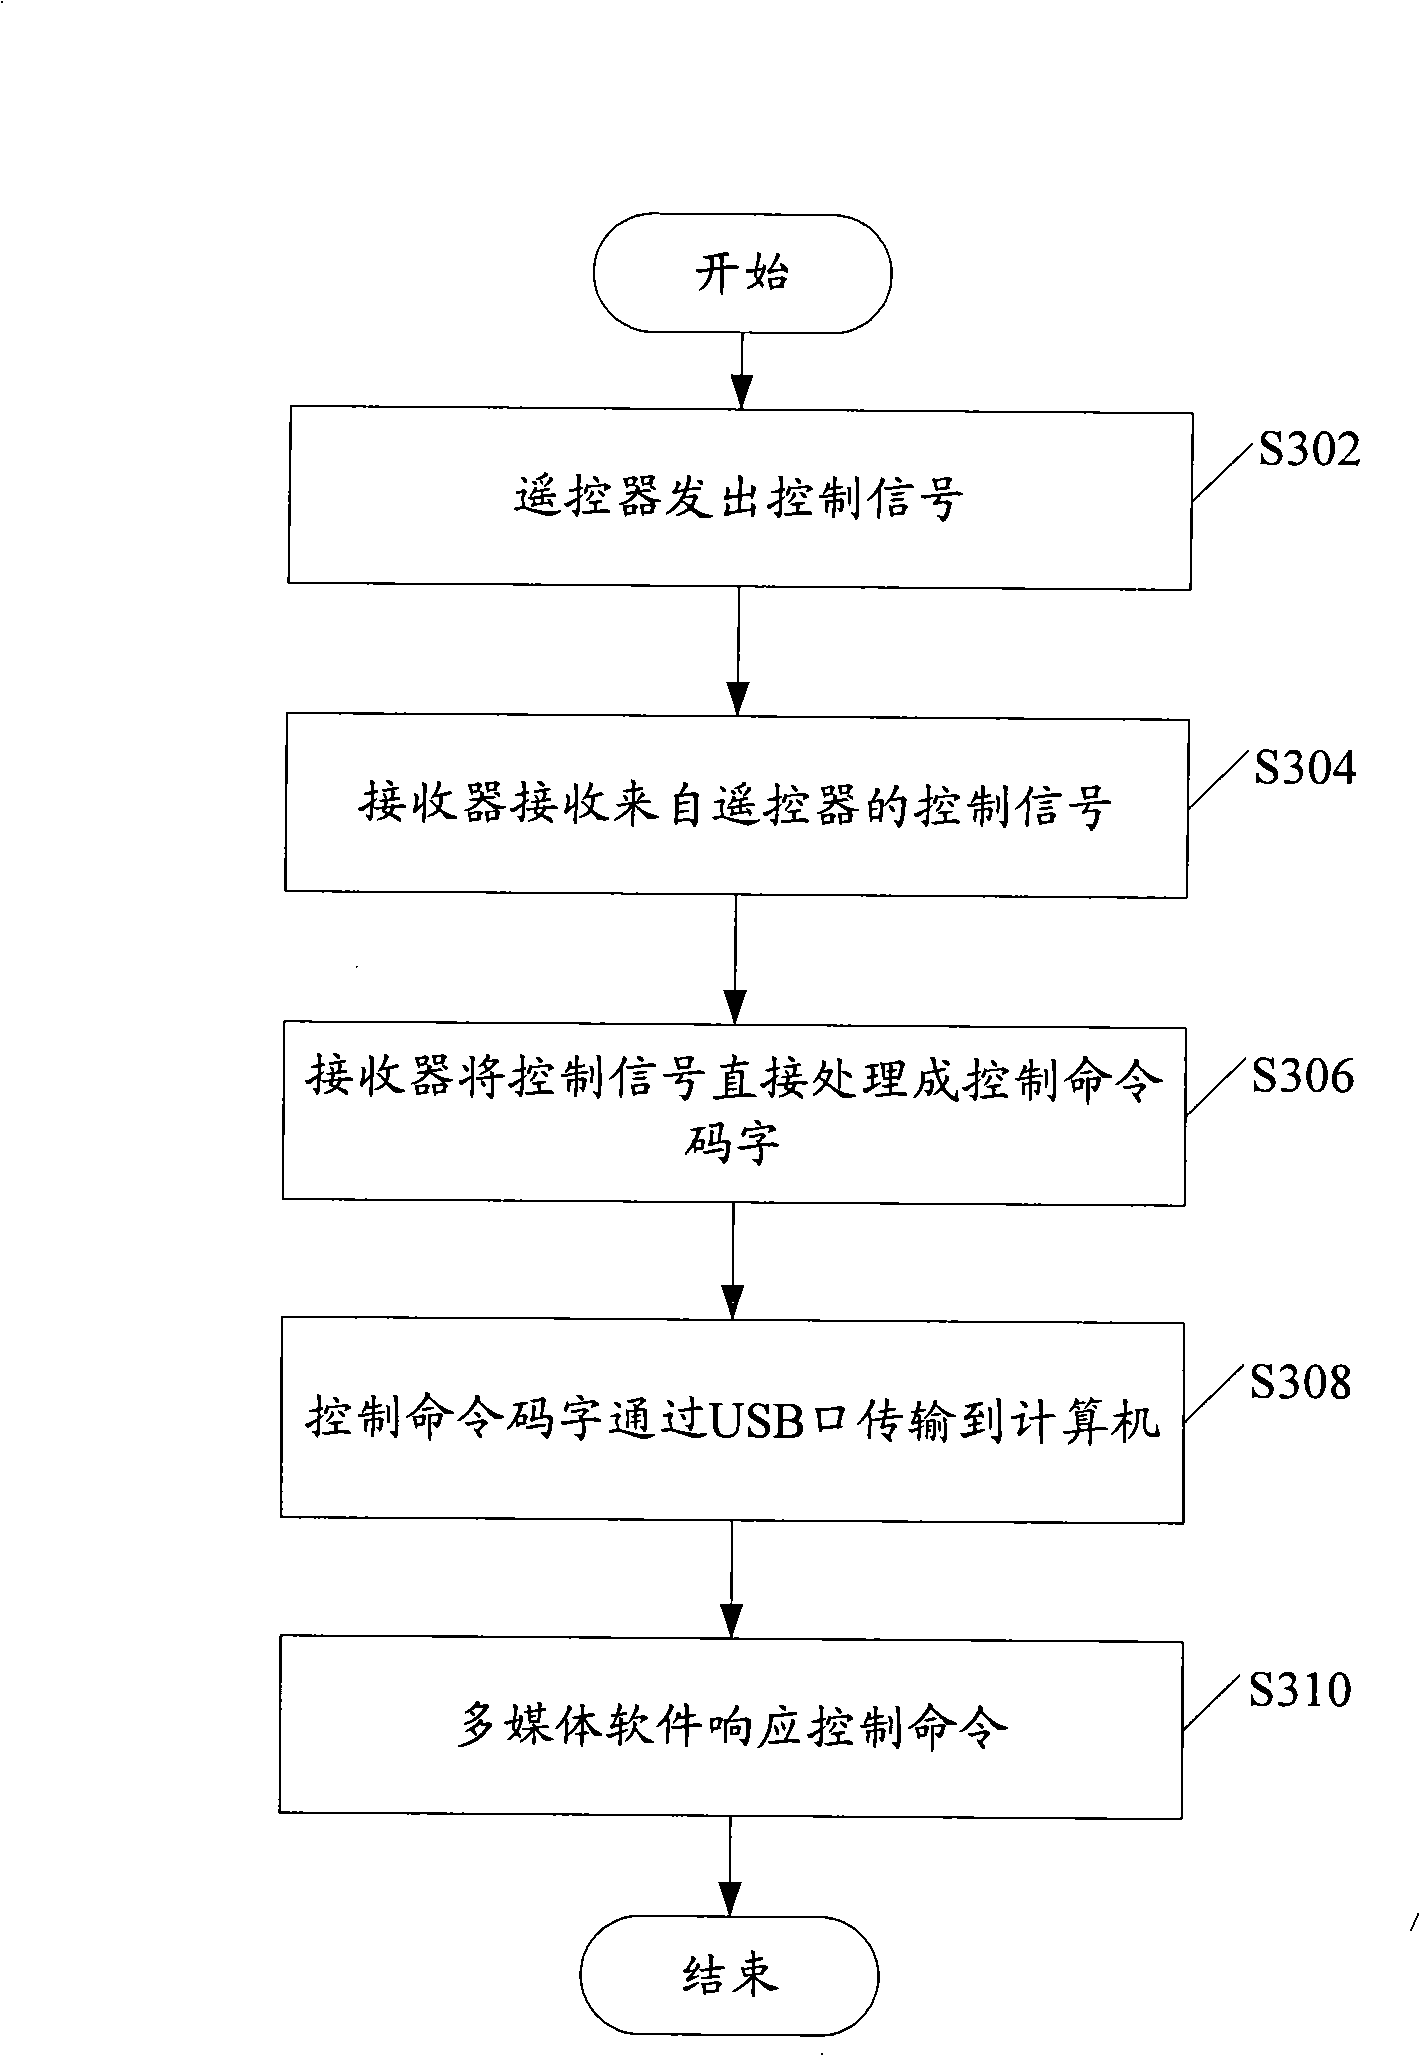 Long-range control system and method of multimedia software